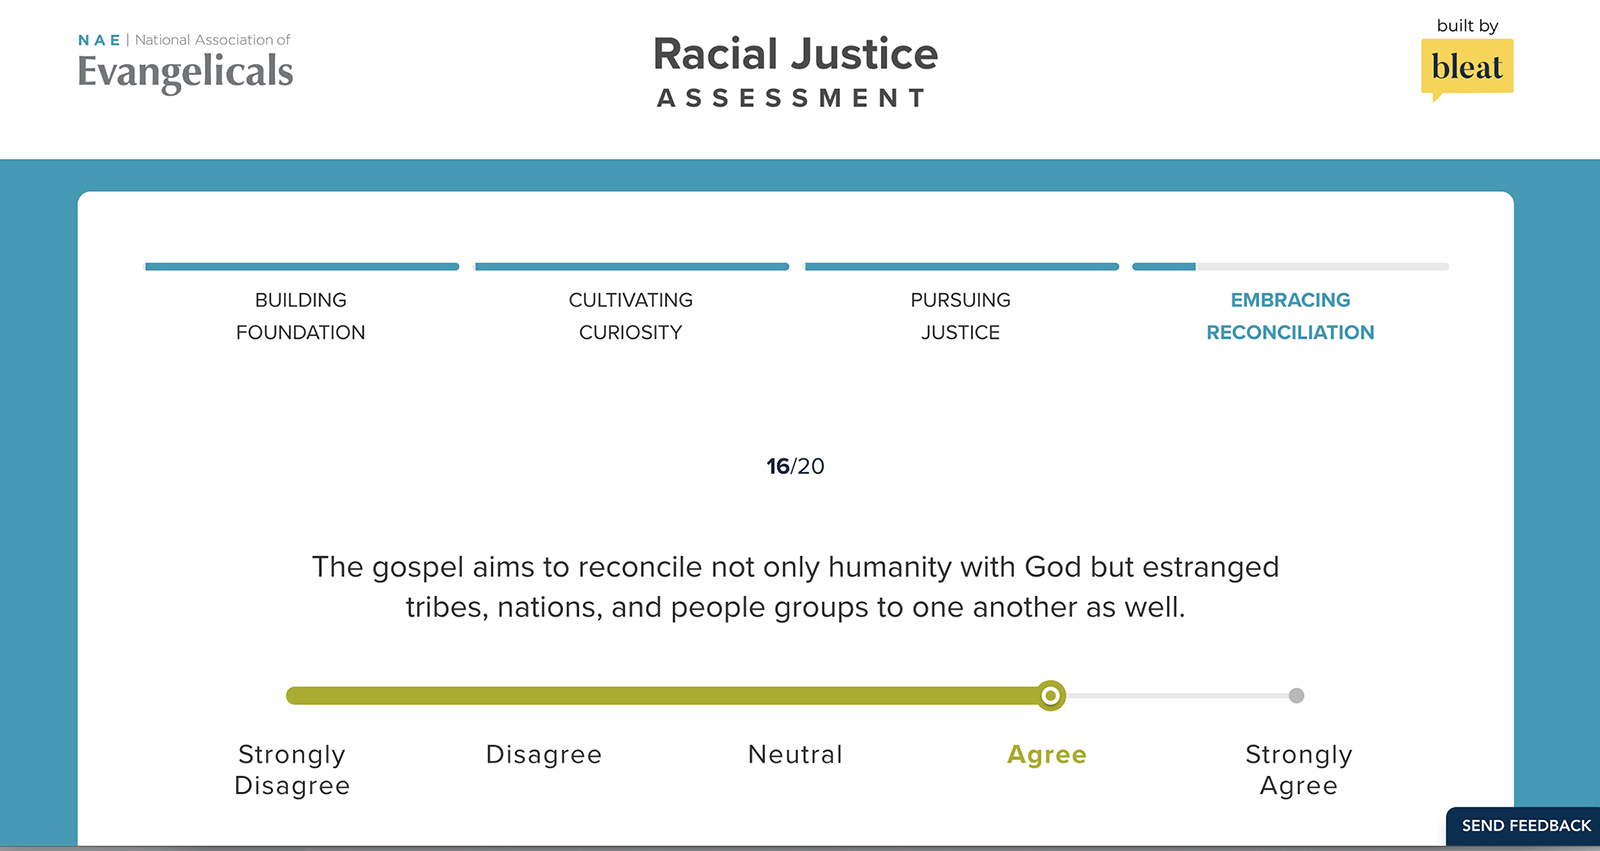 A sample statement from the National Association of Evangelicals' new racial justice assessmen. Screen grab